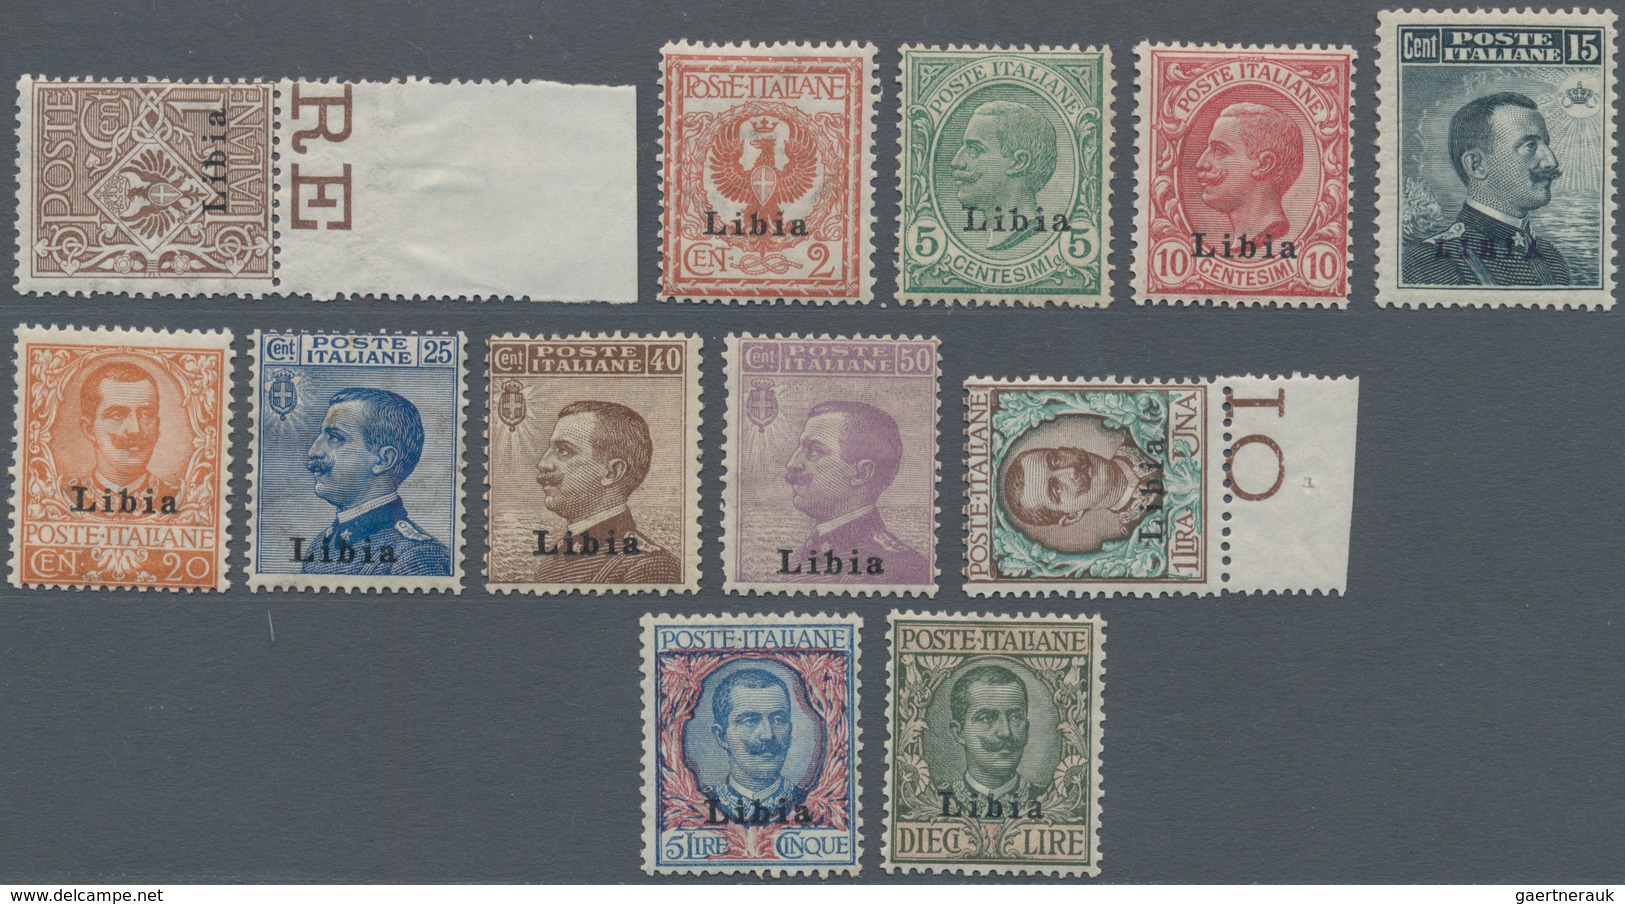 01058 Italienisch-Libyen: 1912/1915: Stamps Of Italy "Michetti" And "Floreale" With Overprint LIBIA, Compl - Libya